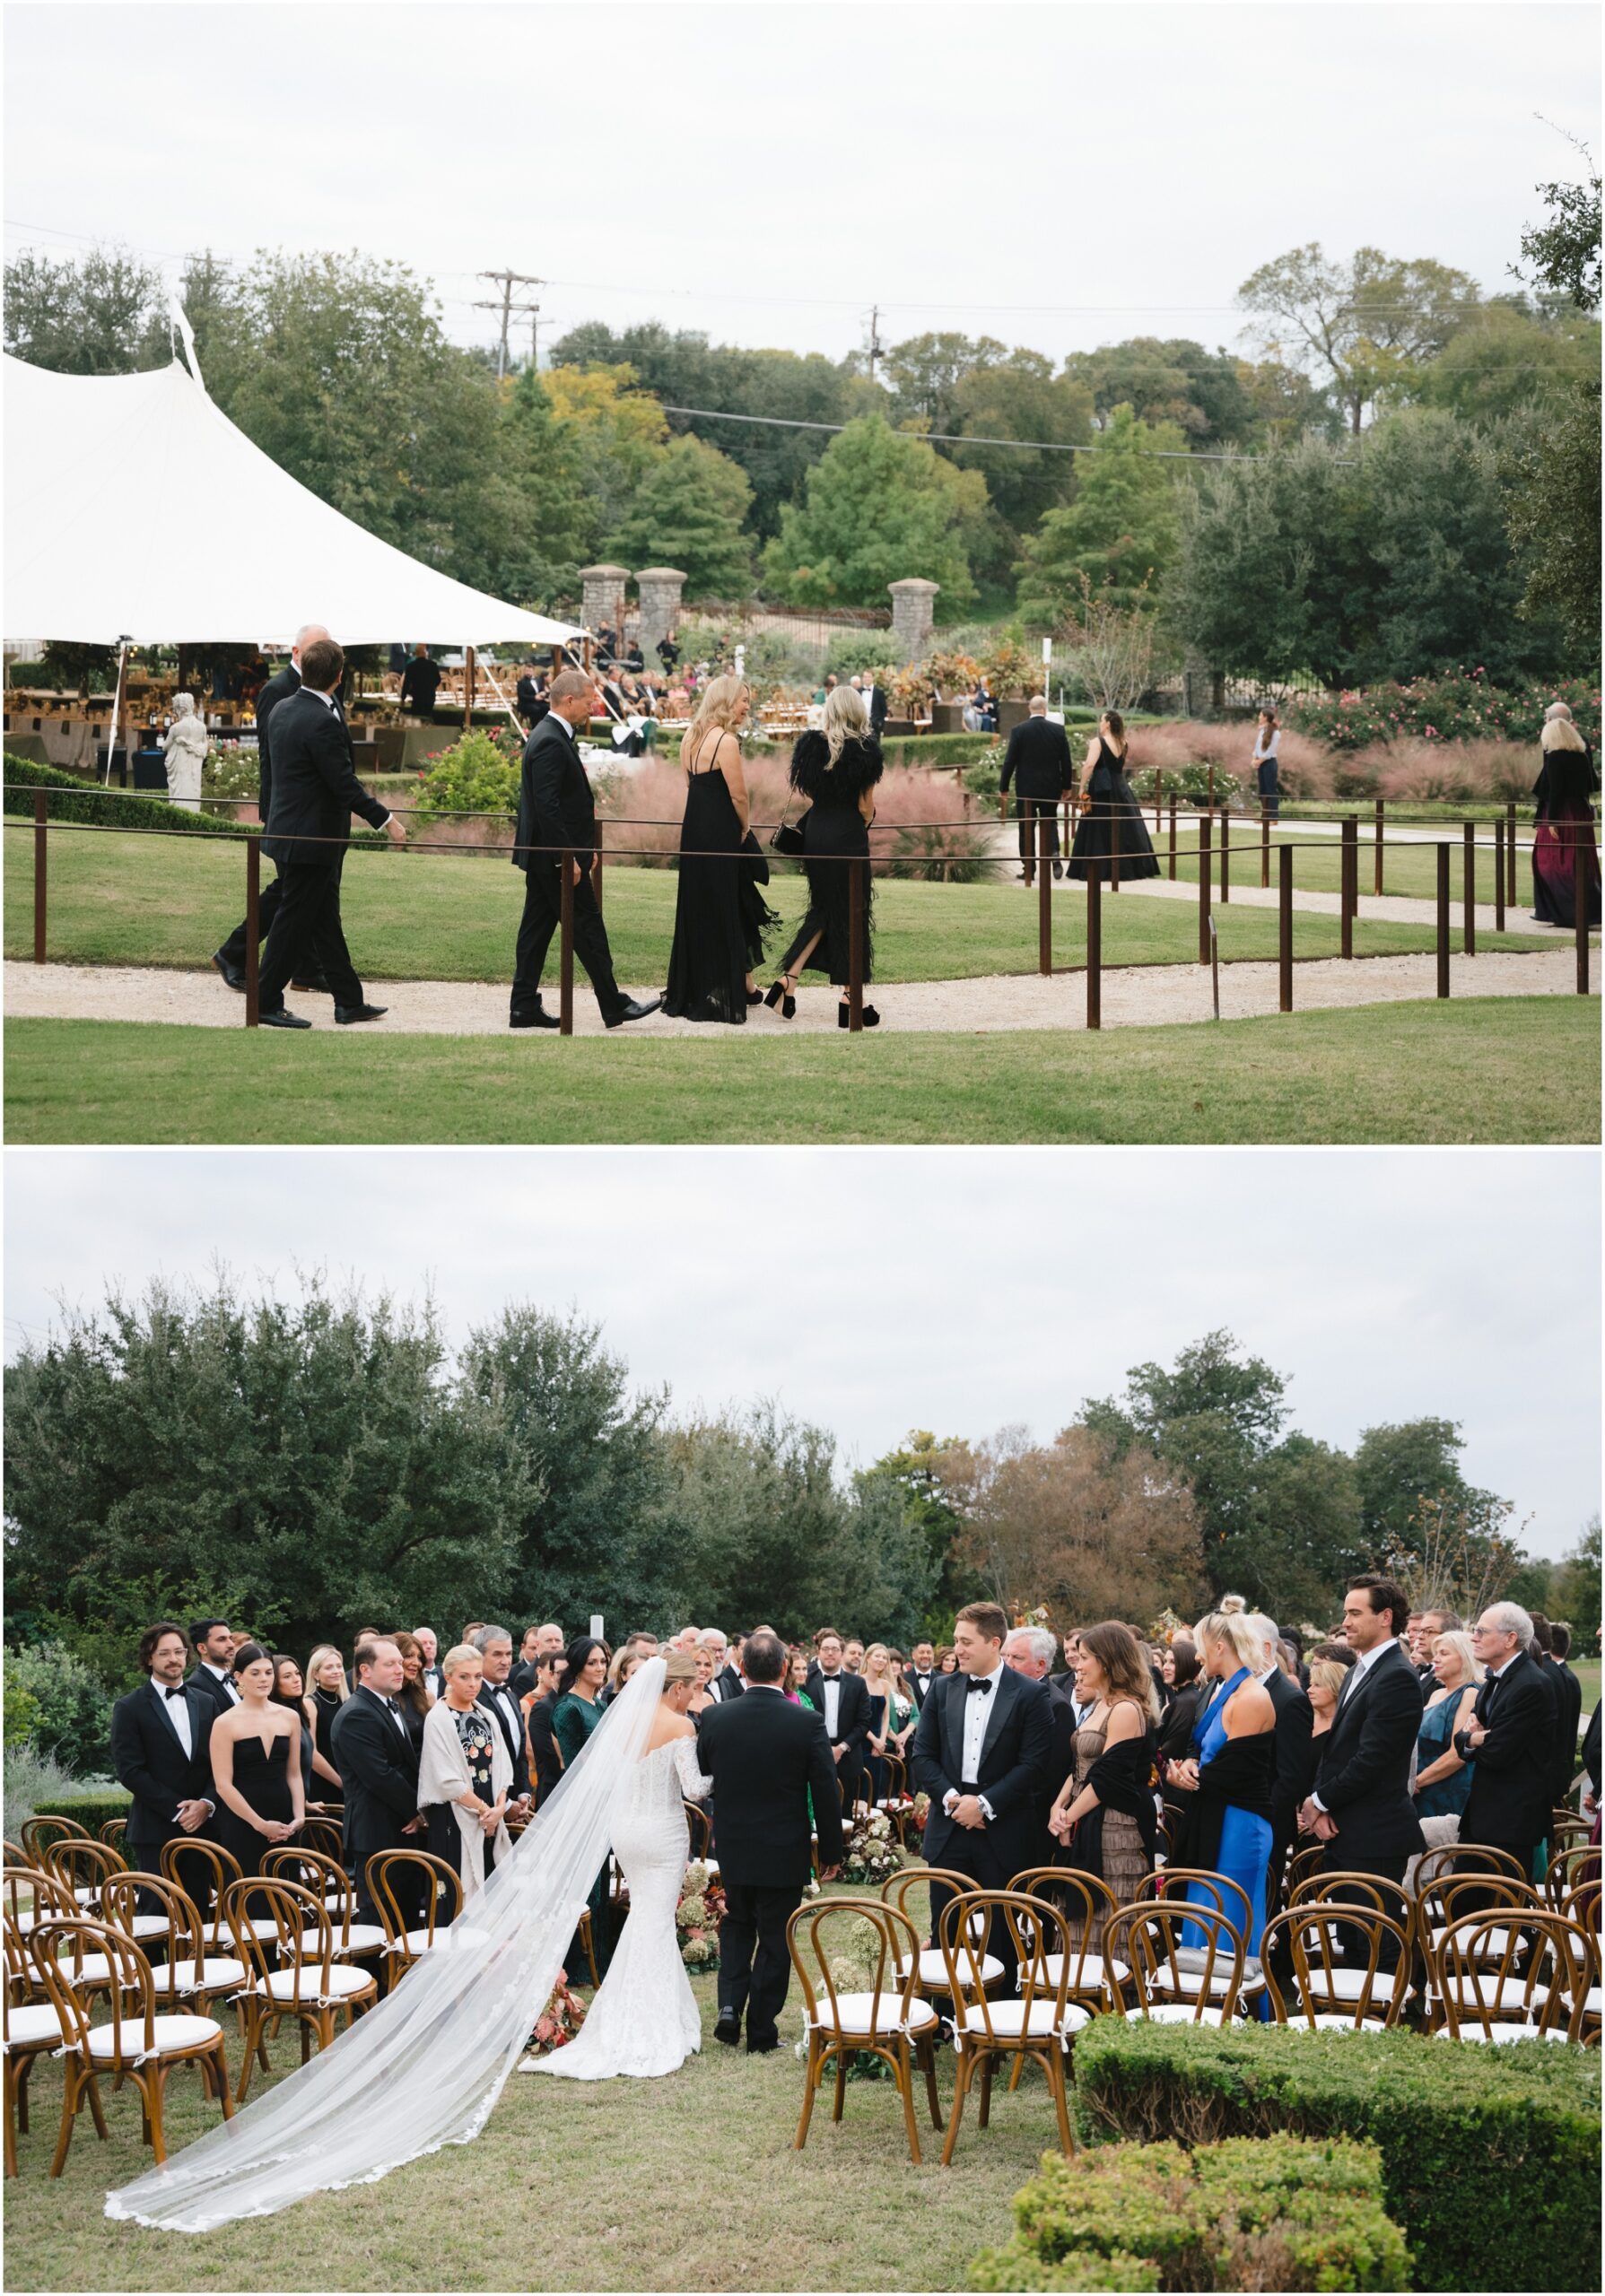 guests walking down to ceremony at a wedding at commodore perry estate in austin texas